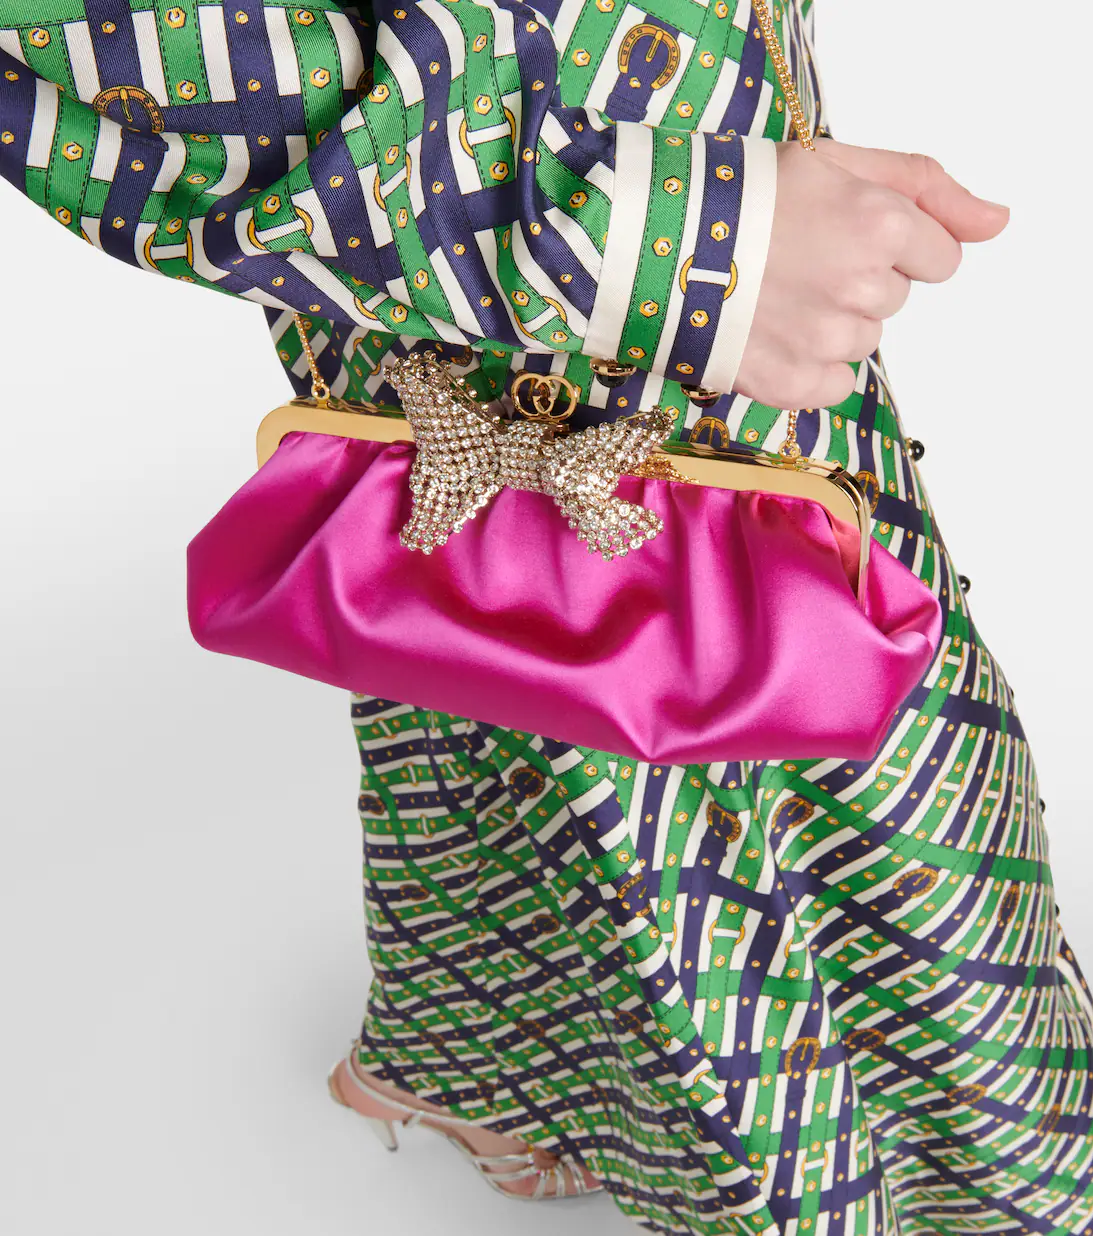 Read more about the article 8 Best-selling Colorful Evening Bags To Make Your Outfit Pop!